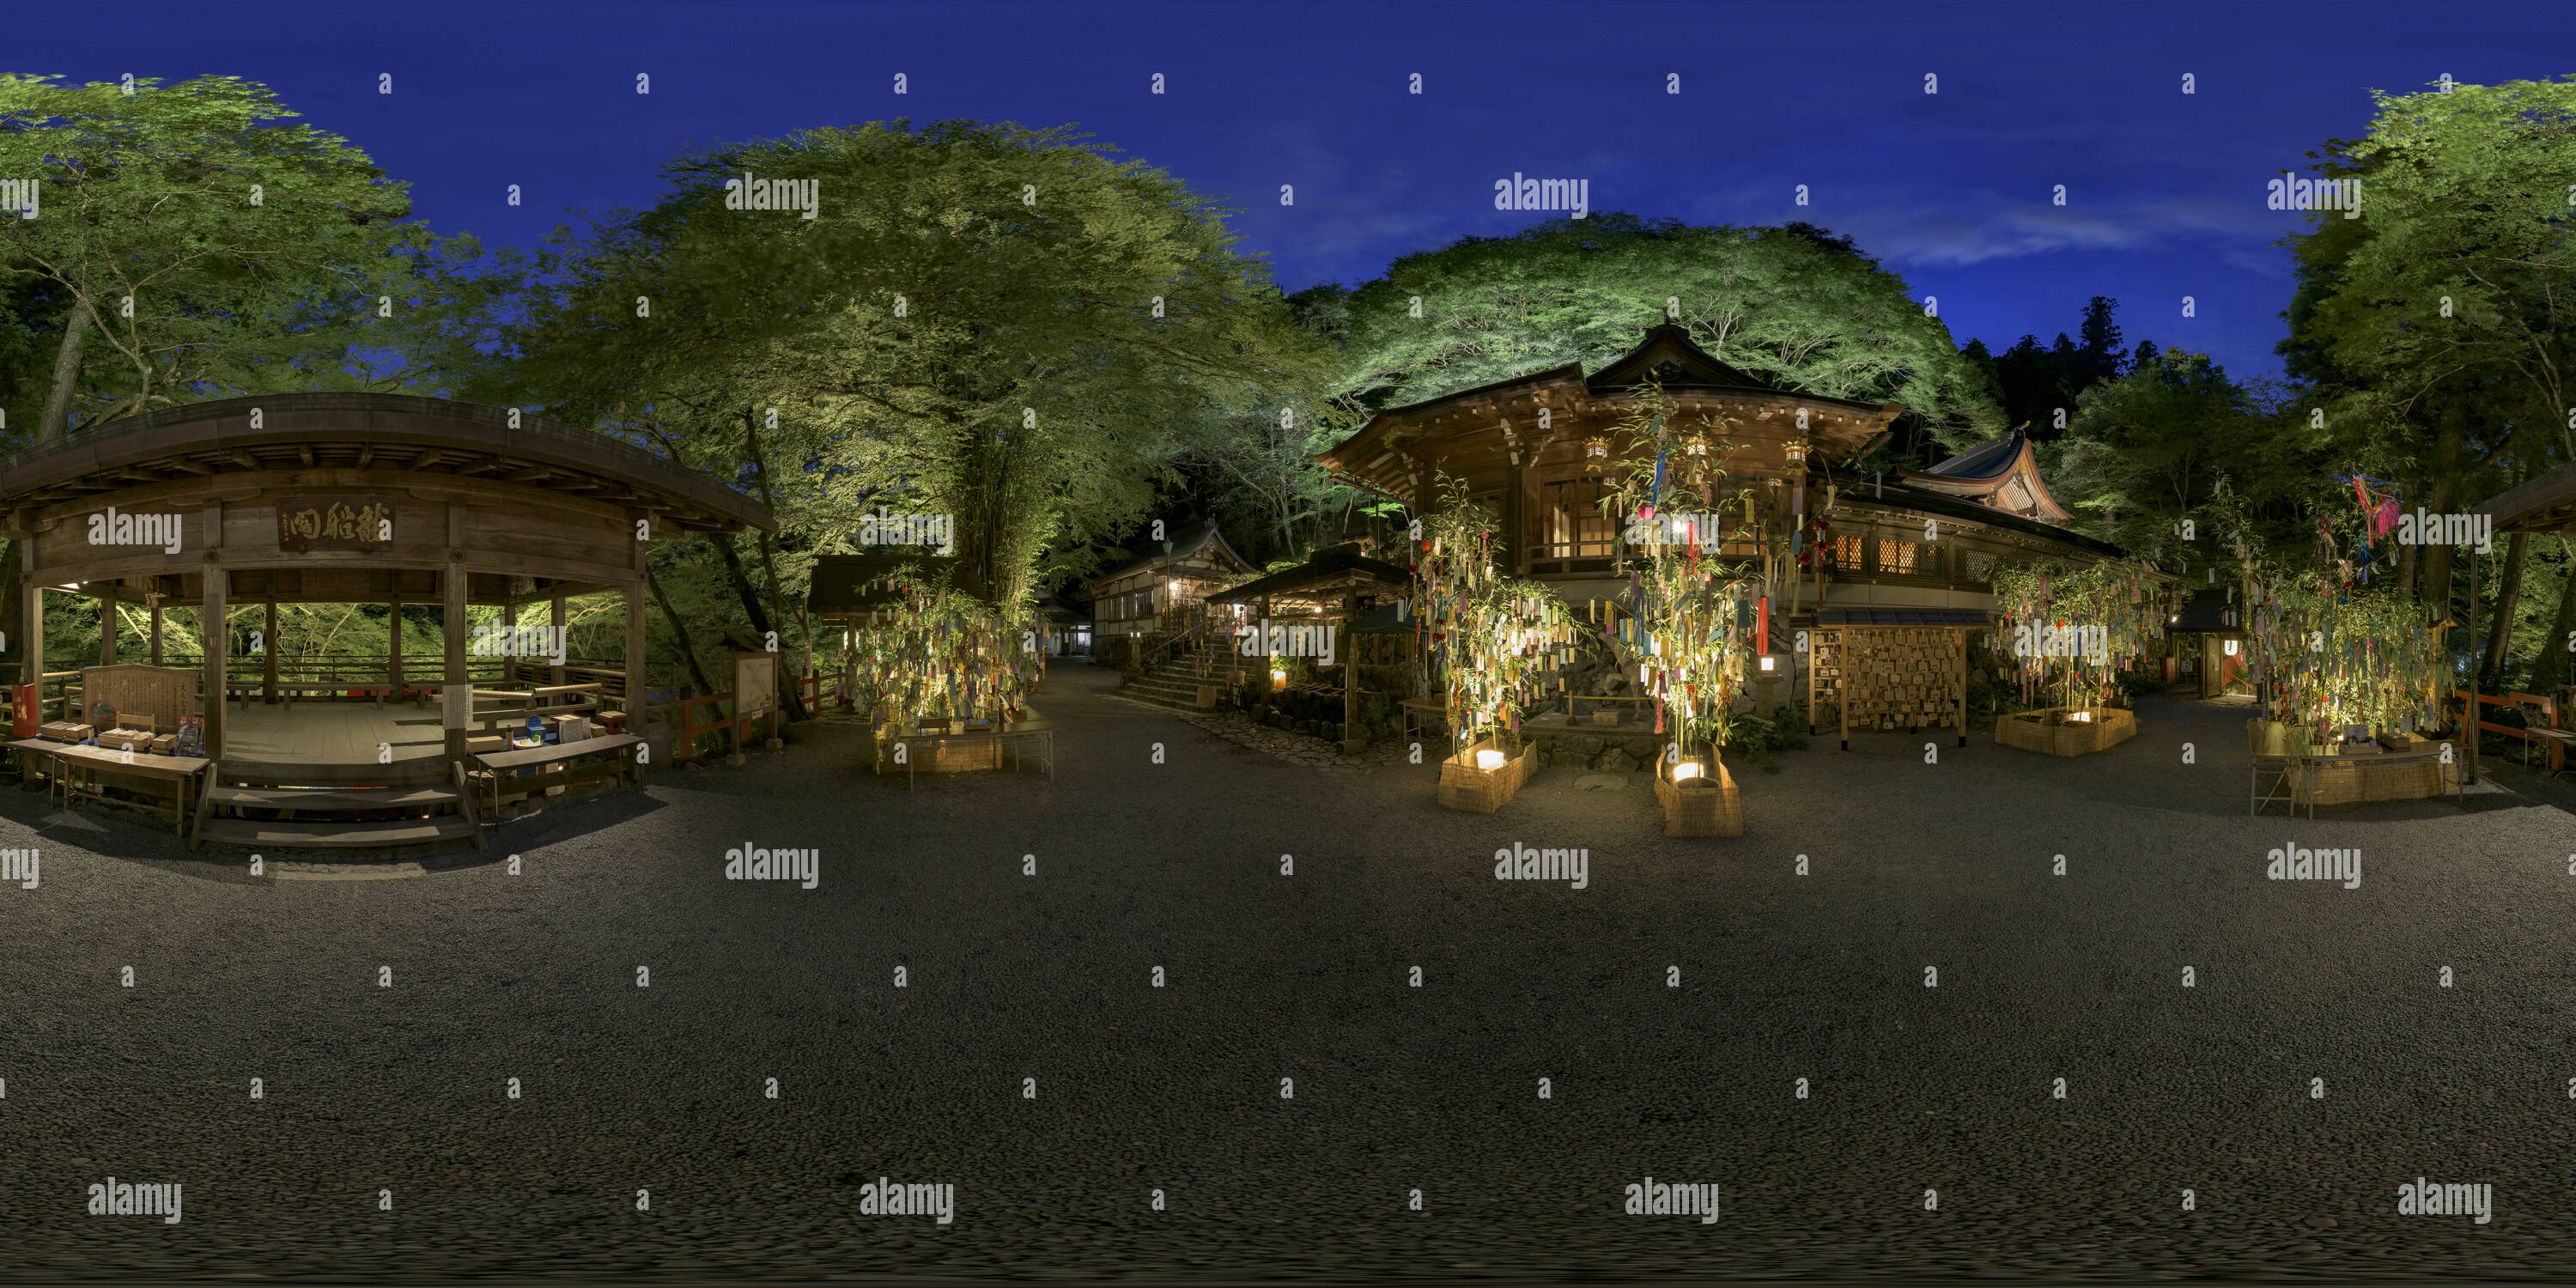 360 degree panoramic view of Kibune Shrine at night with lights on the lantern in Kyoto, Japan 06